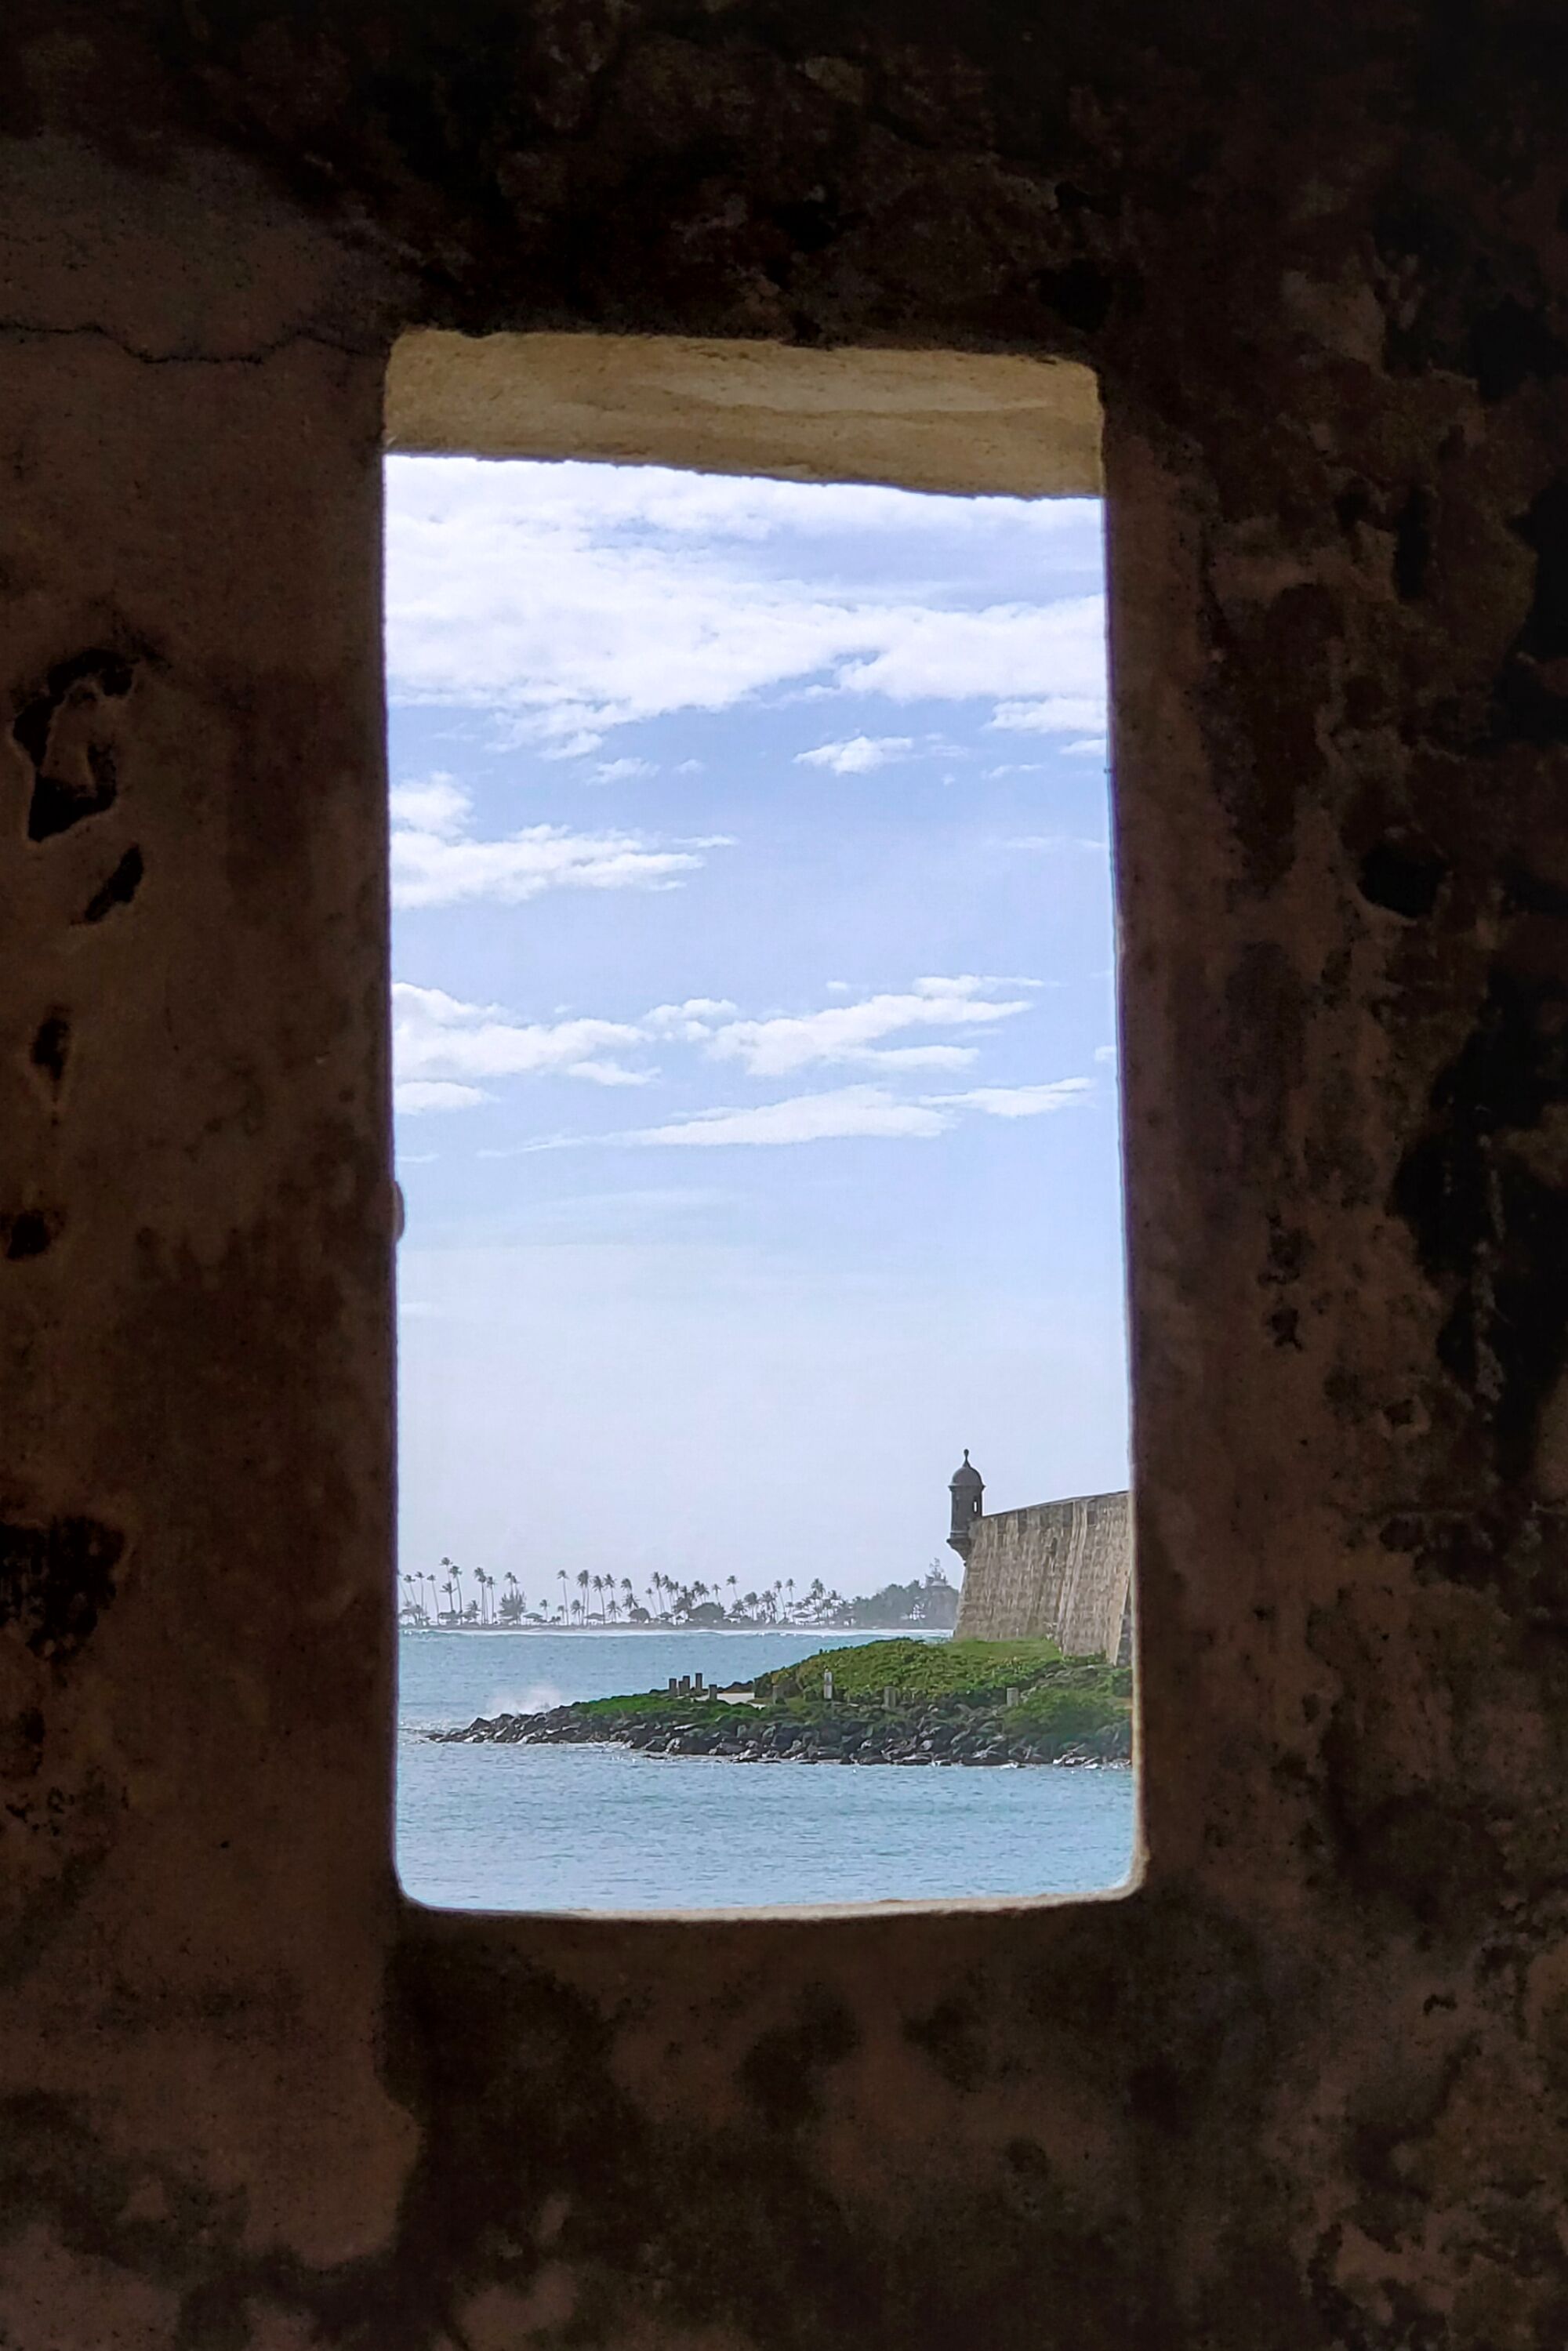 A view through a rugged window of a structure next to the ocean